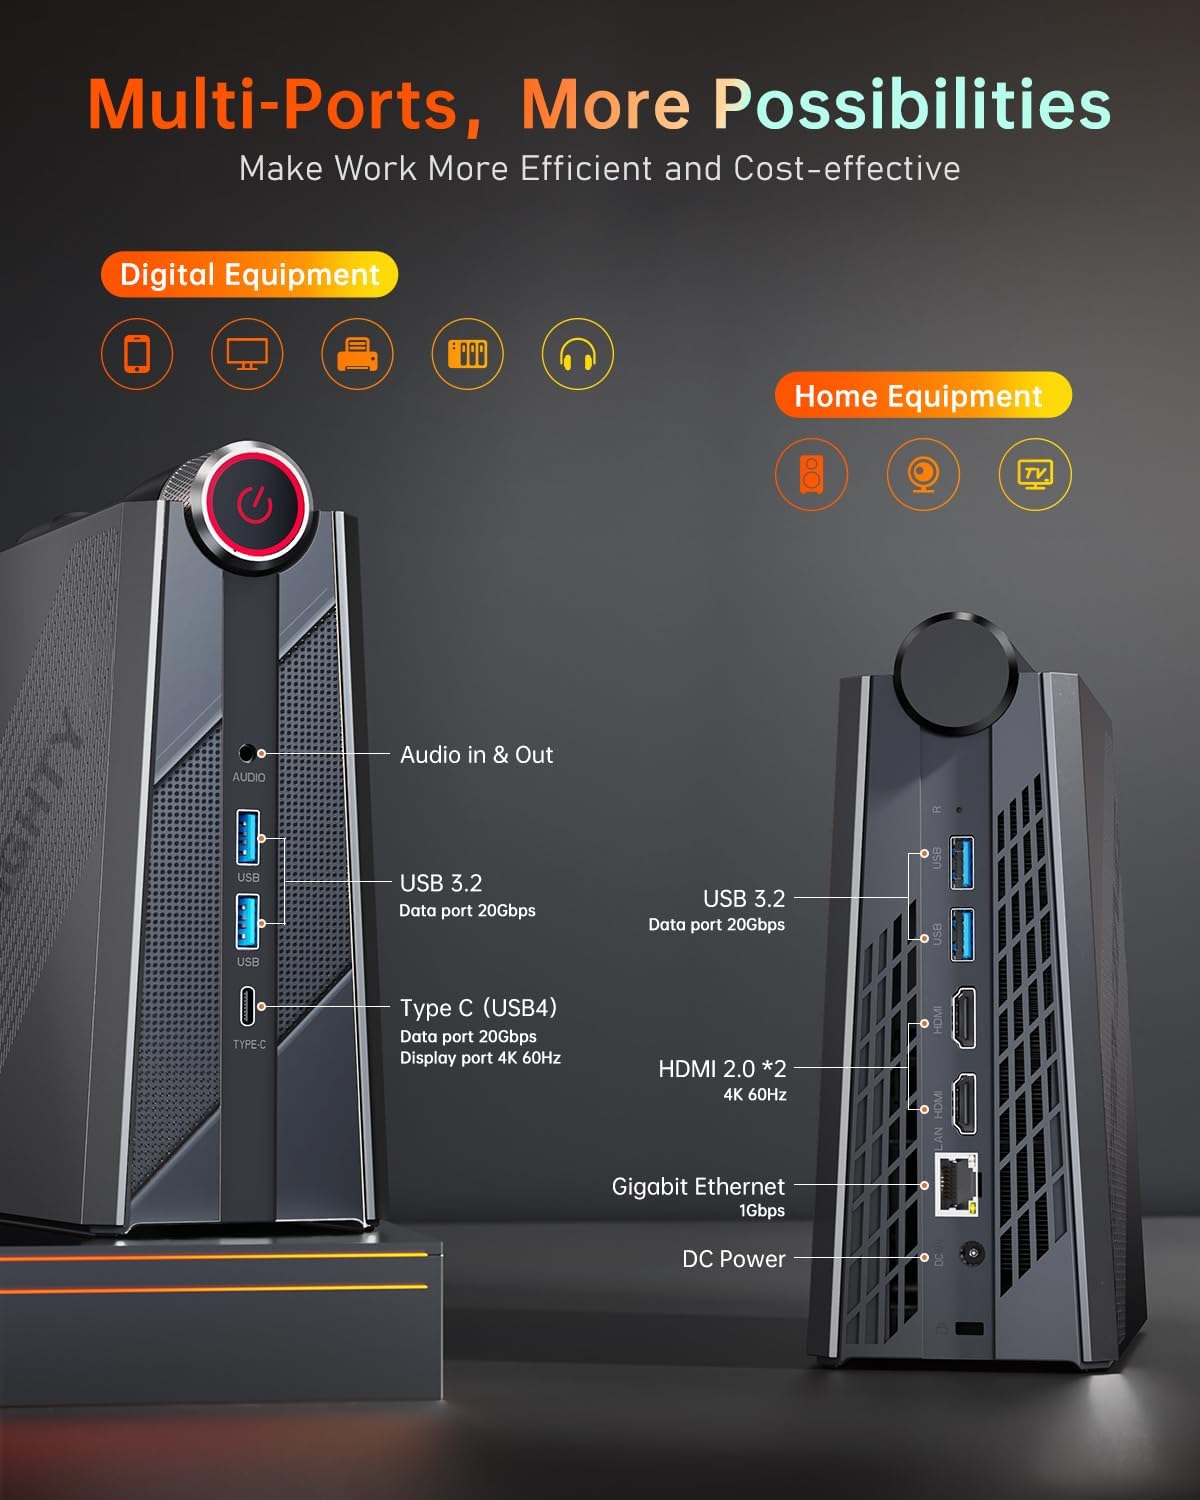 [Gaming/Business] Mini PC Intel Core i9-11900H(up to 4.9GHz),Gaming Computer 16GB DDR4 512GB SSD,24 MB Cache,WiFi6/BT5.2/Multi-Mode/Dual Fans/RGB